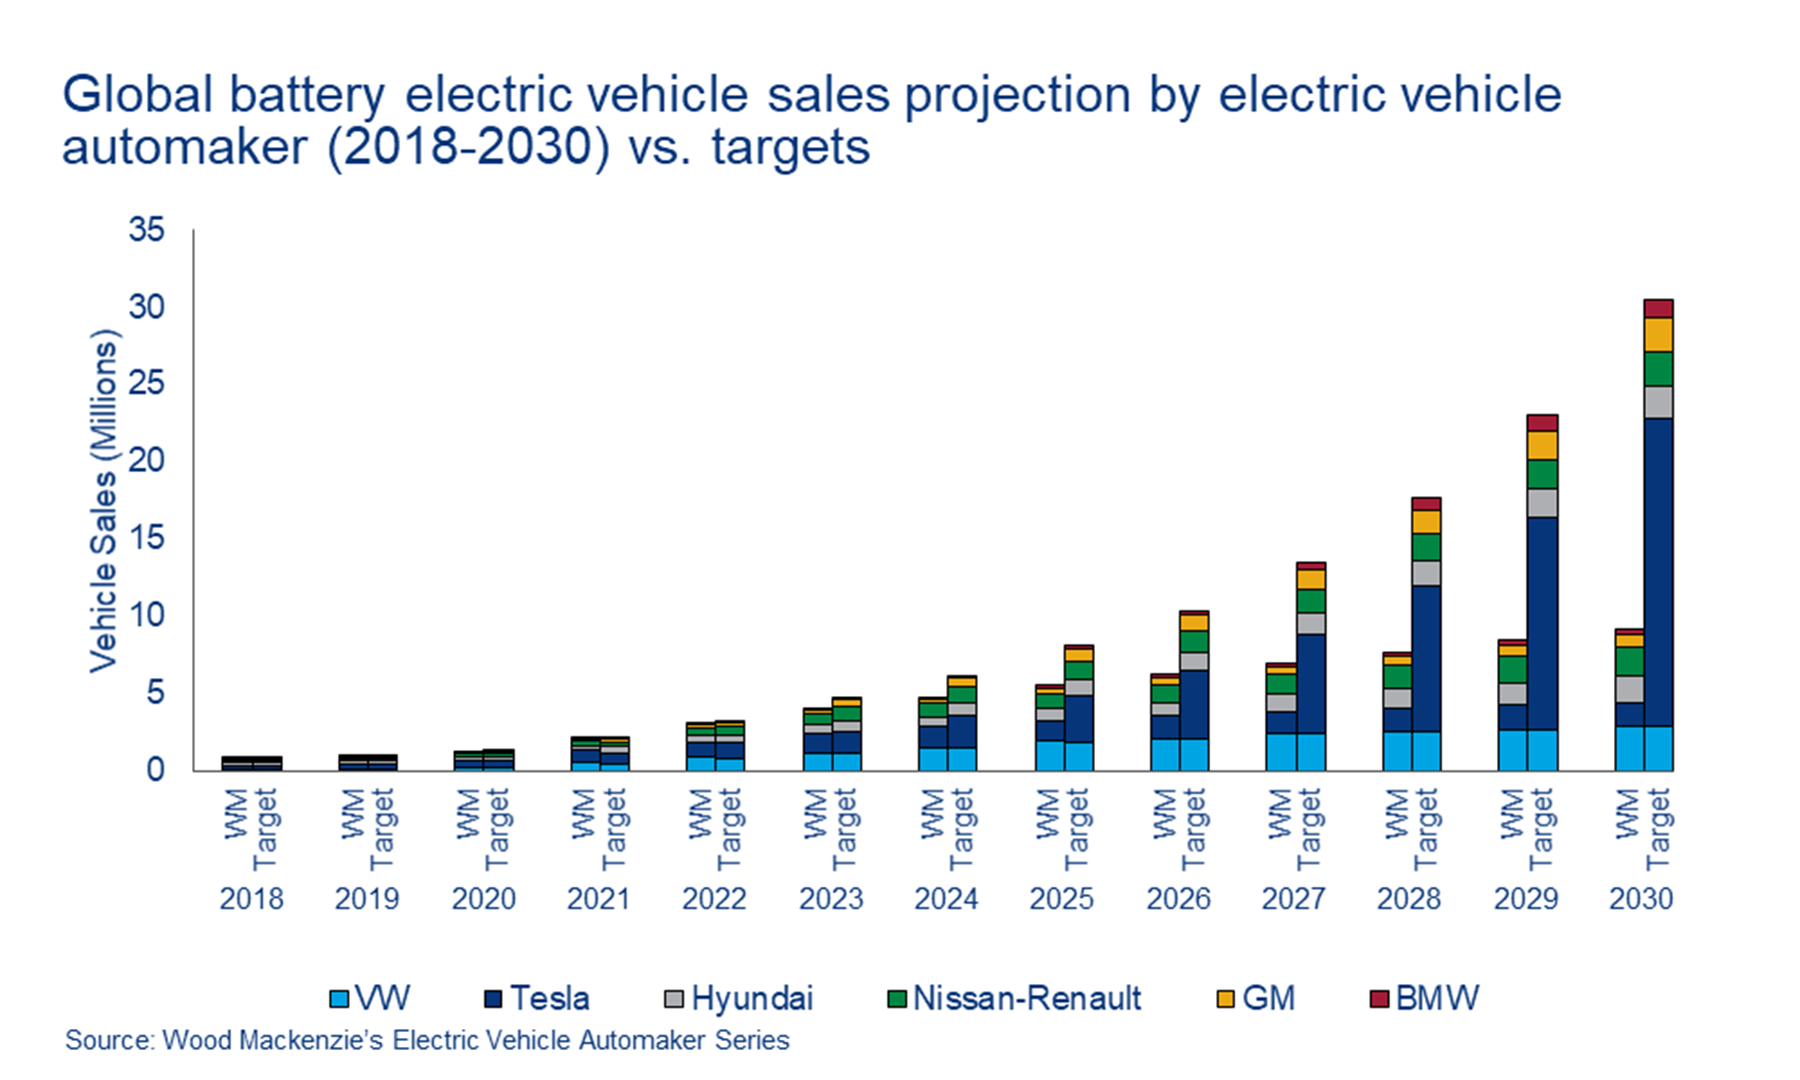 Chart shows the global battery electric vehicle sales projection by electric vehicle automaker (2018-2030) vs. targets